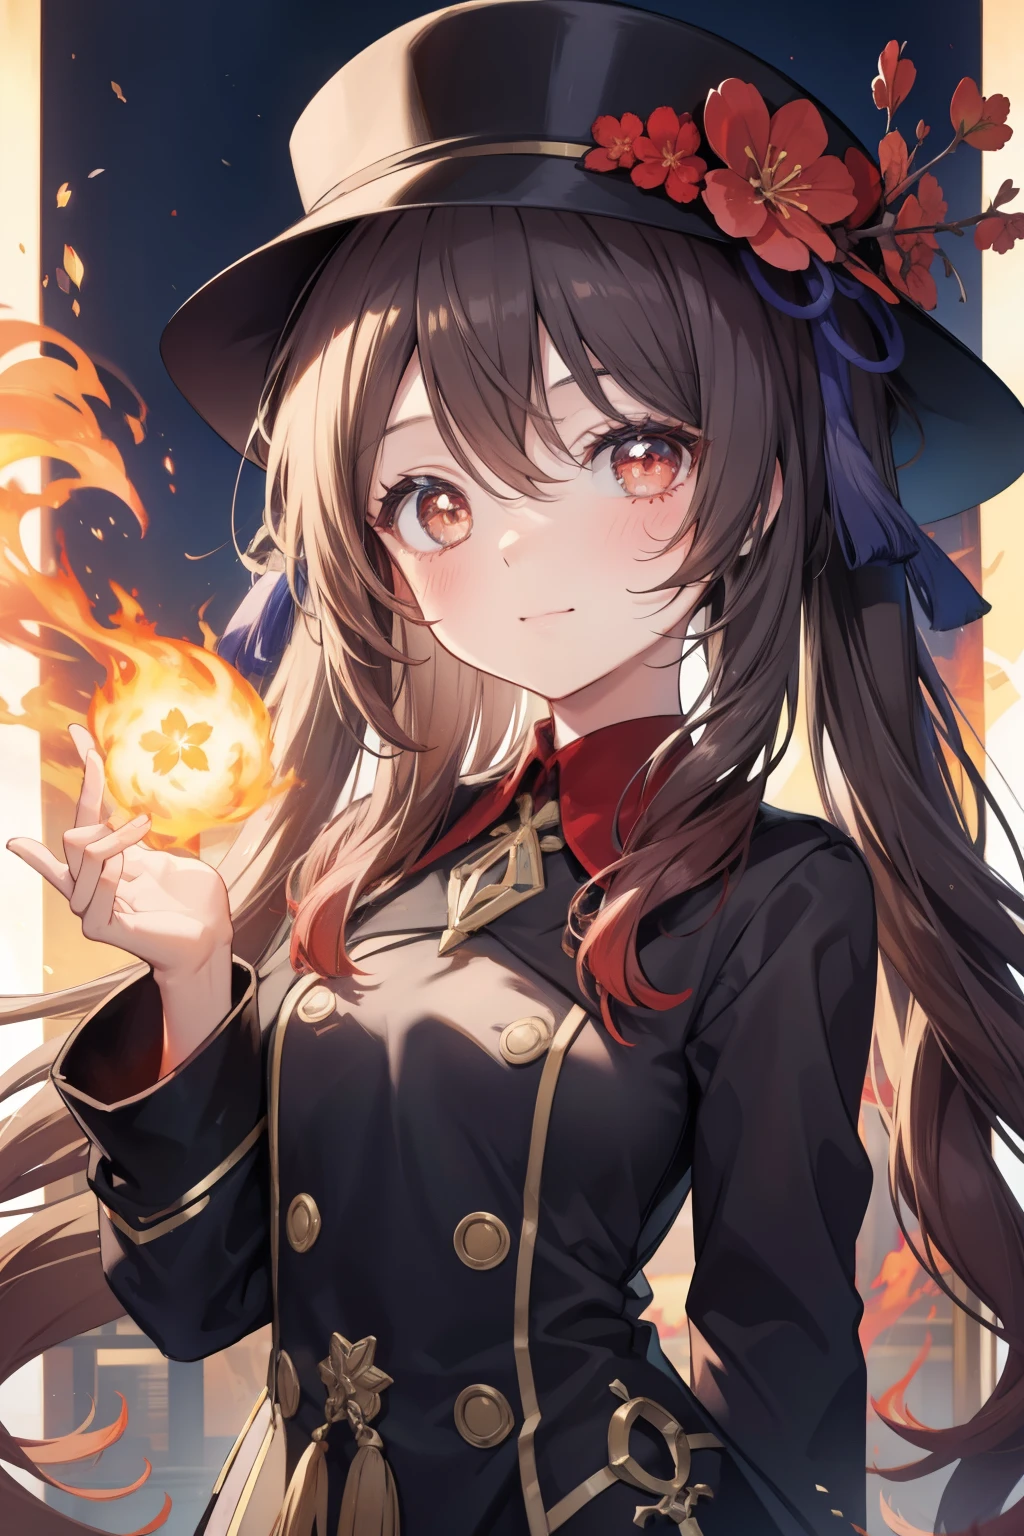 Walnuts、Good looking girl (blush, Perfect Face), independent , Looking at the camera, masterpiece, Anime art style, Cute Characters, Most detailed, high quality、Nico Nico Smile、There are highlights in the eyes、Wear a hat、Long Hair、Use fire magic、Fighting